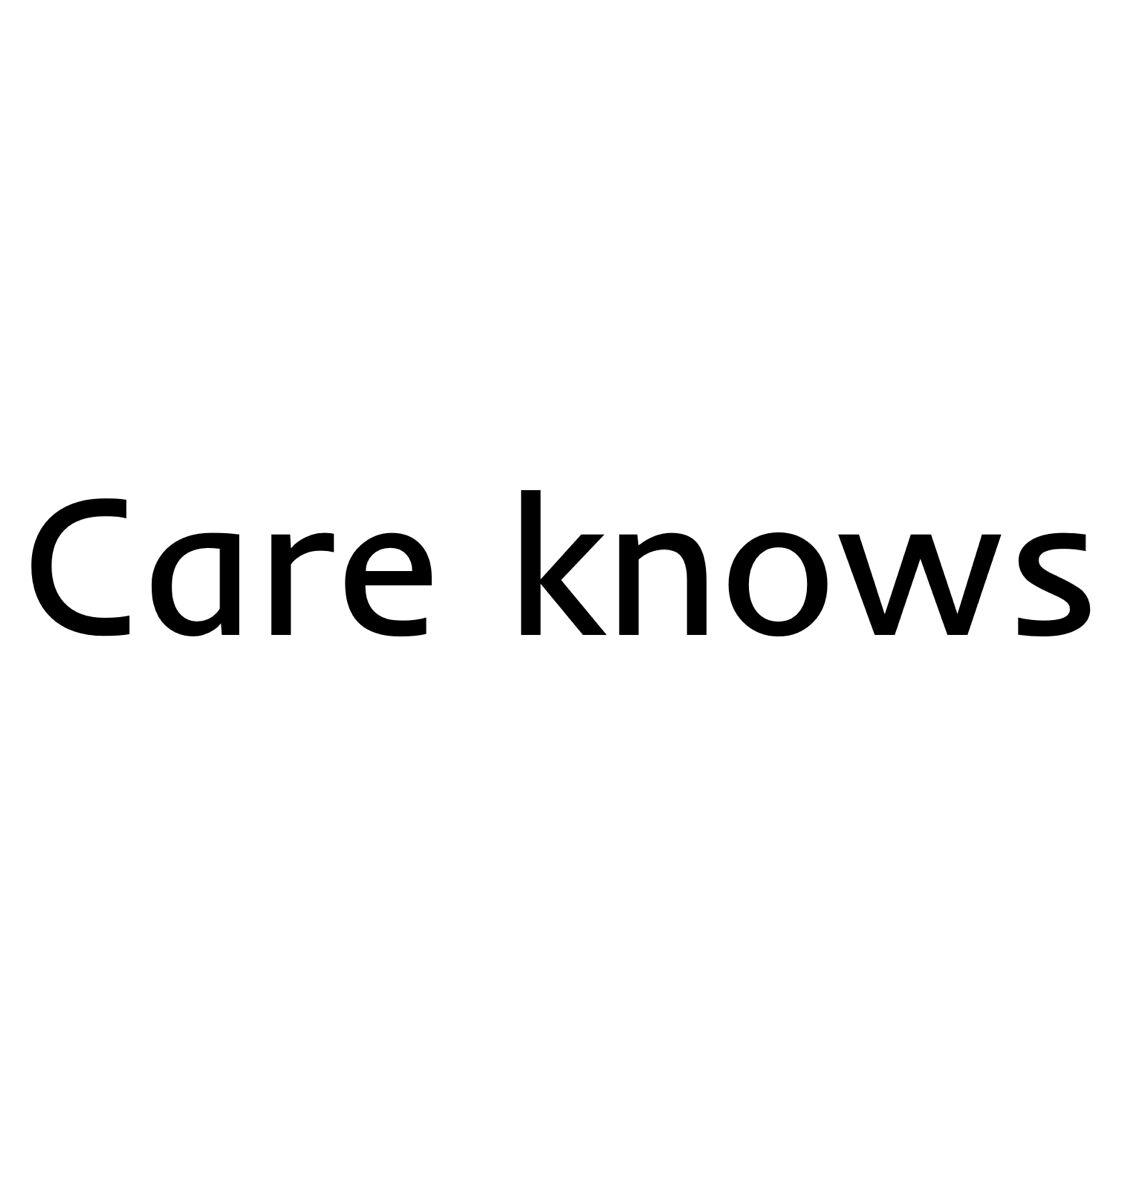 care knows